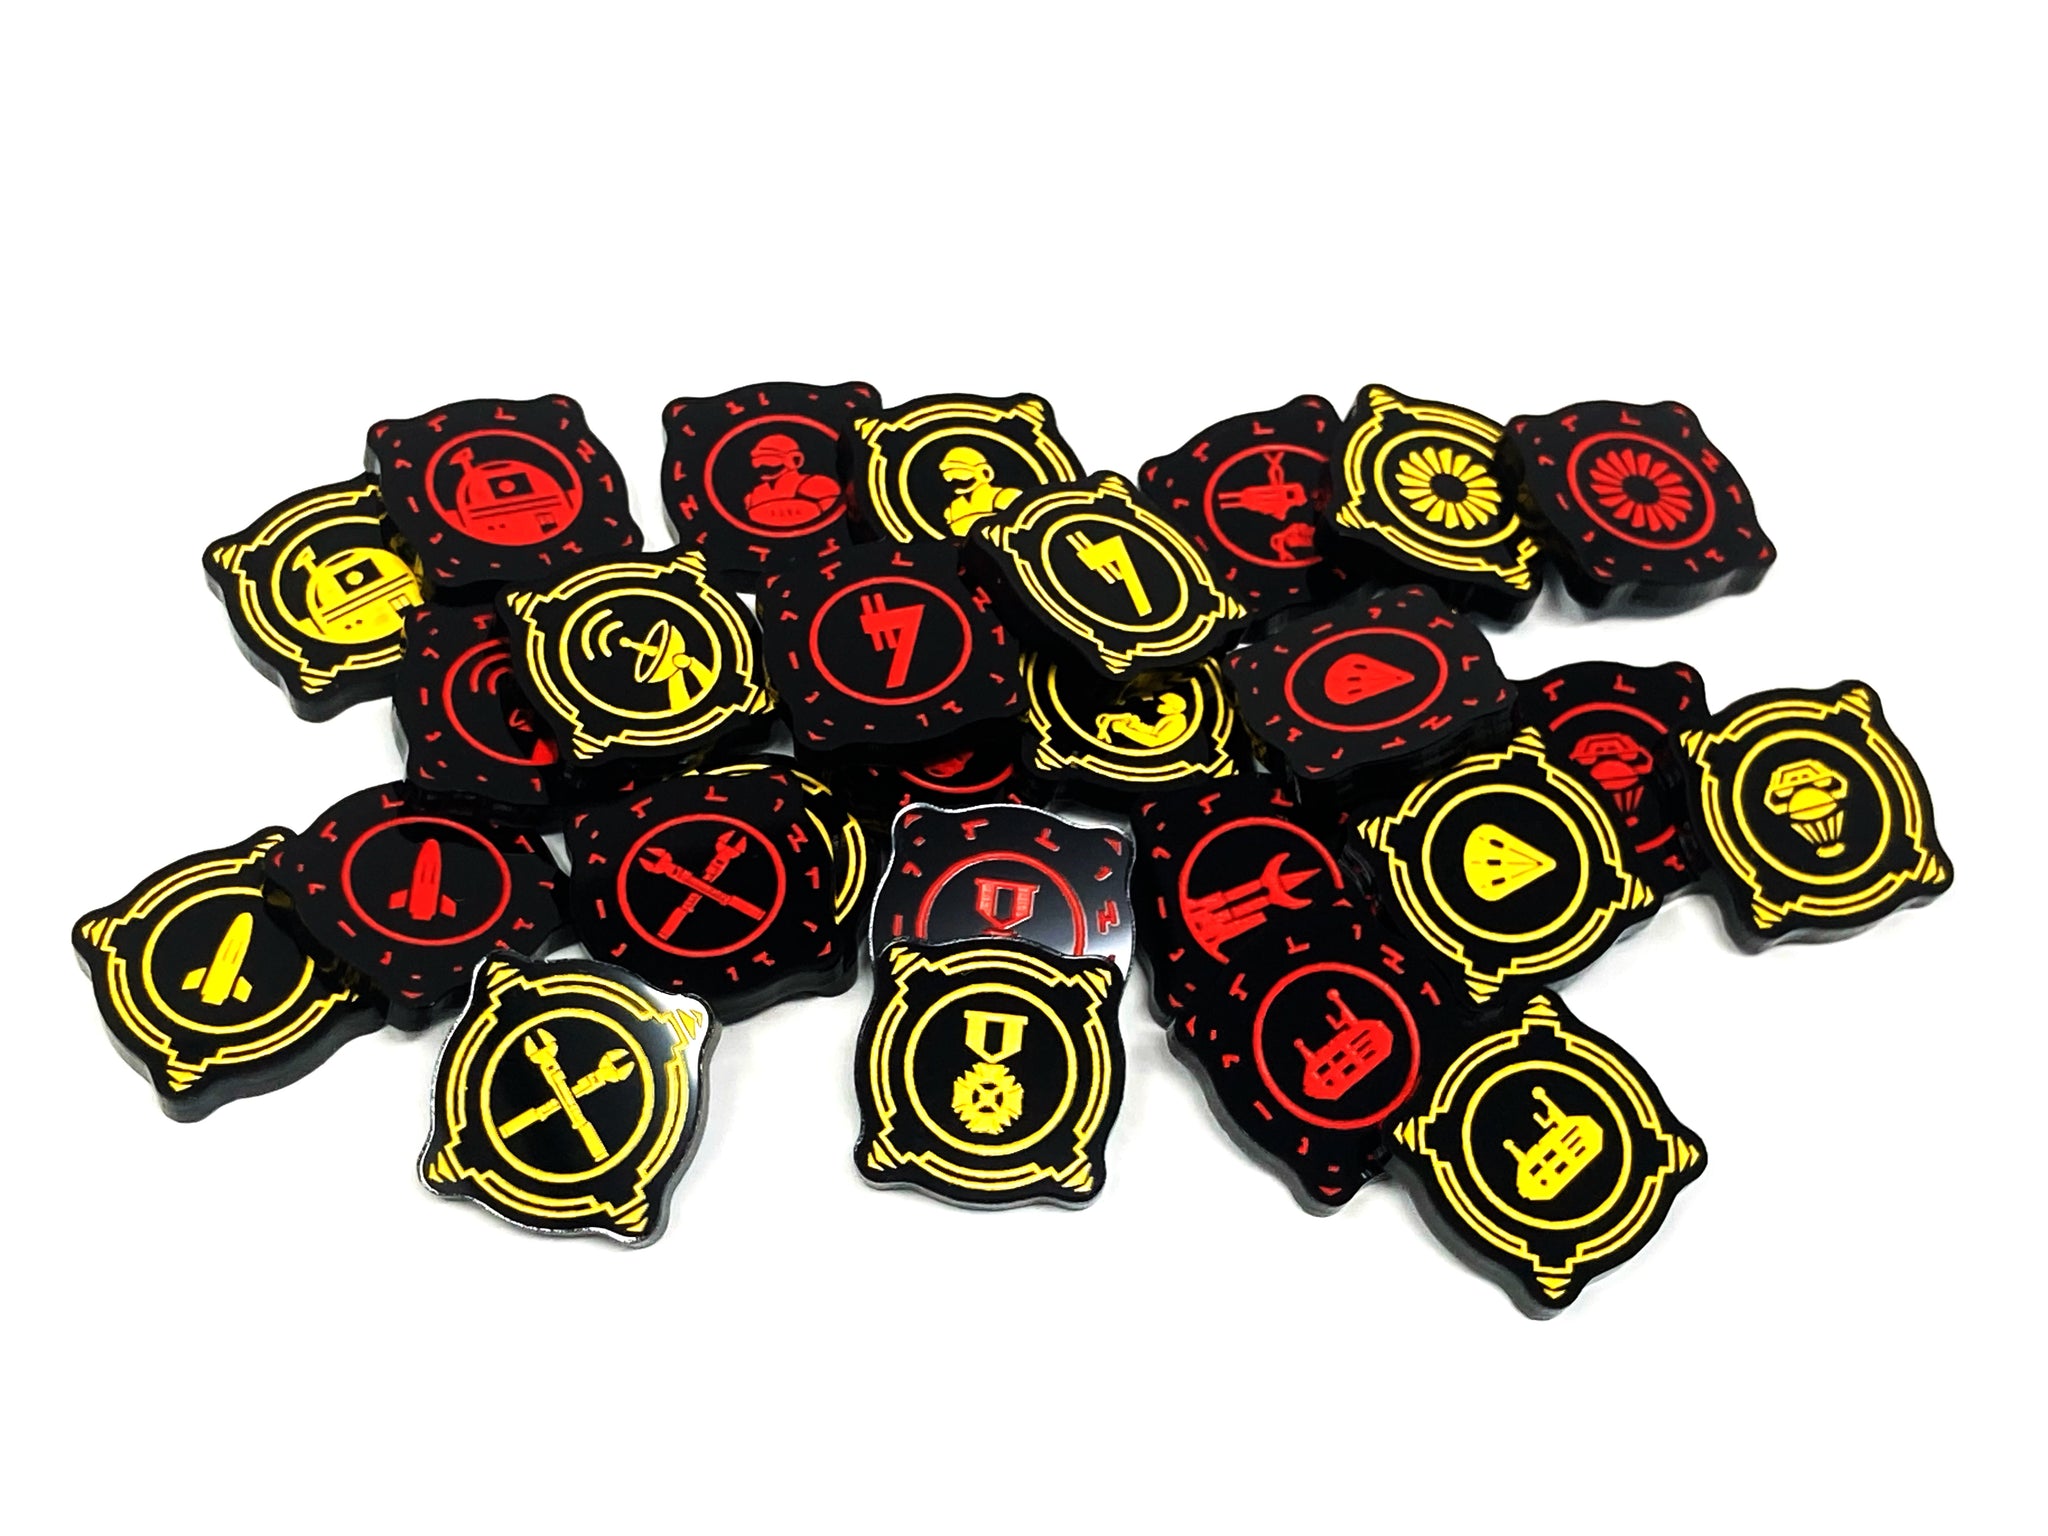 2 x Payload Charge Tokens - Black Series (Double Sided)